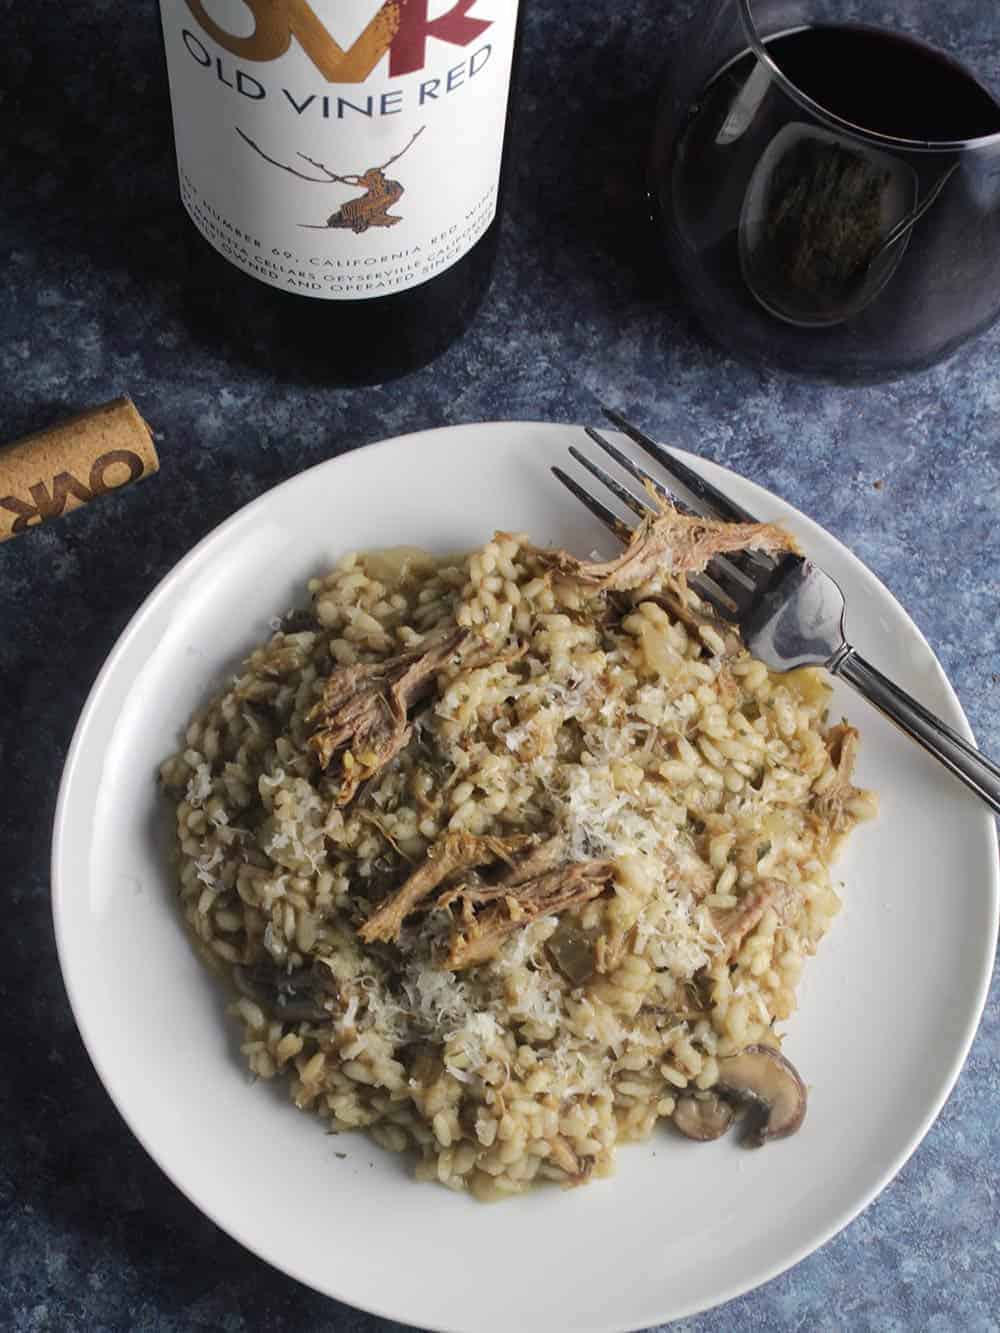 plate of pulled pork risotto with red wine.